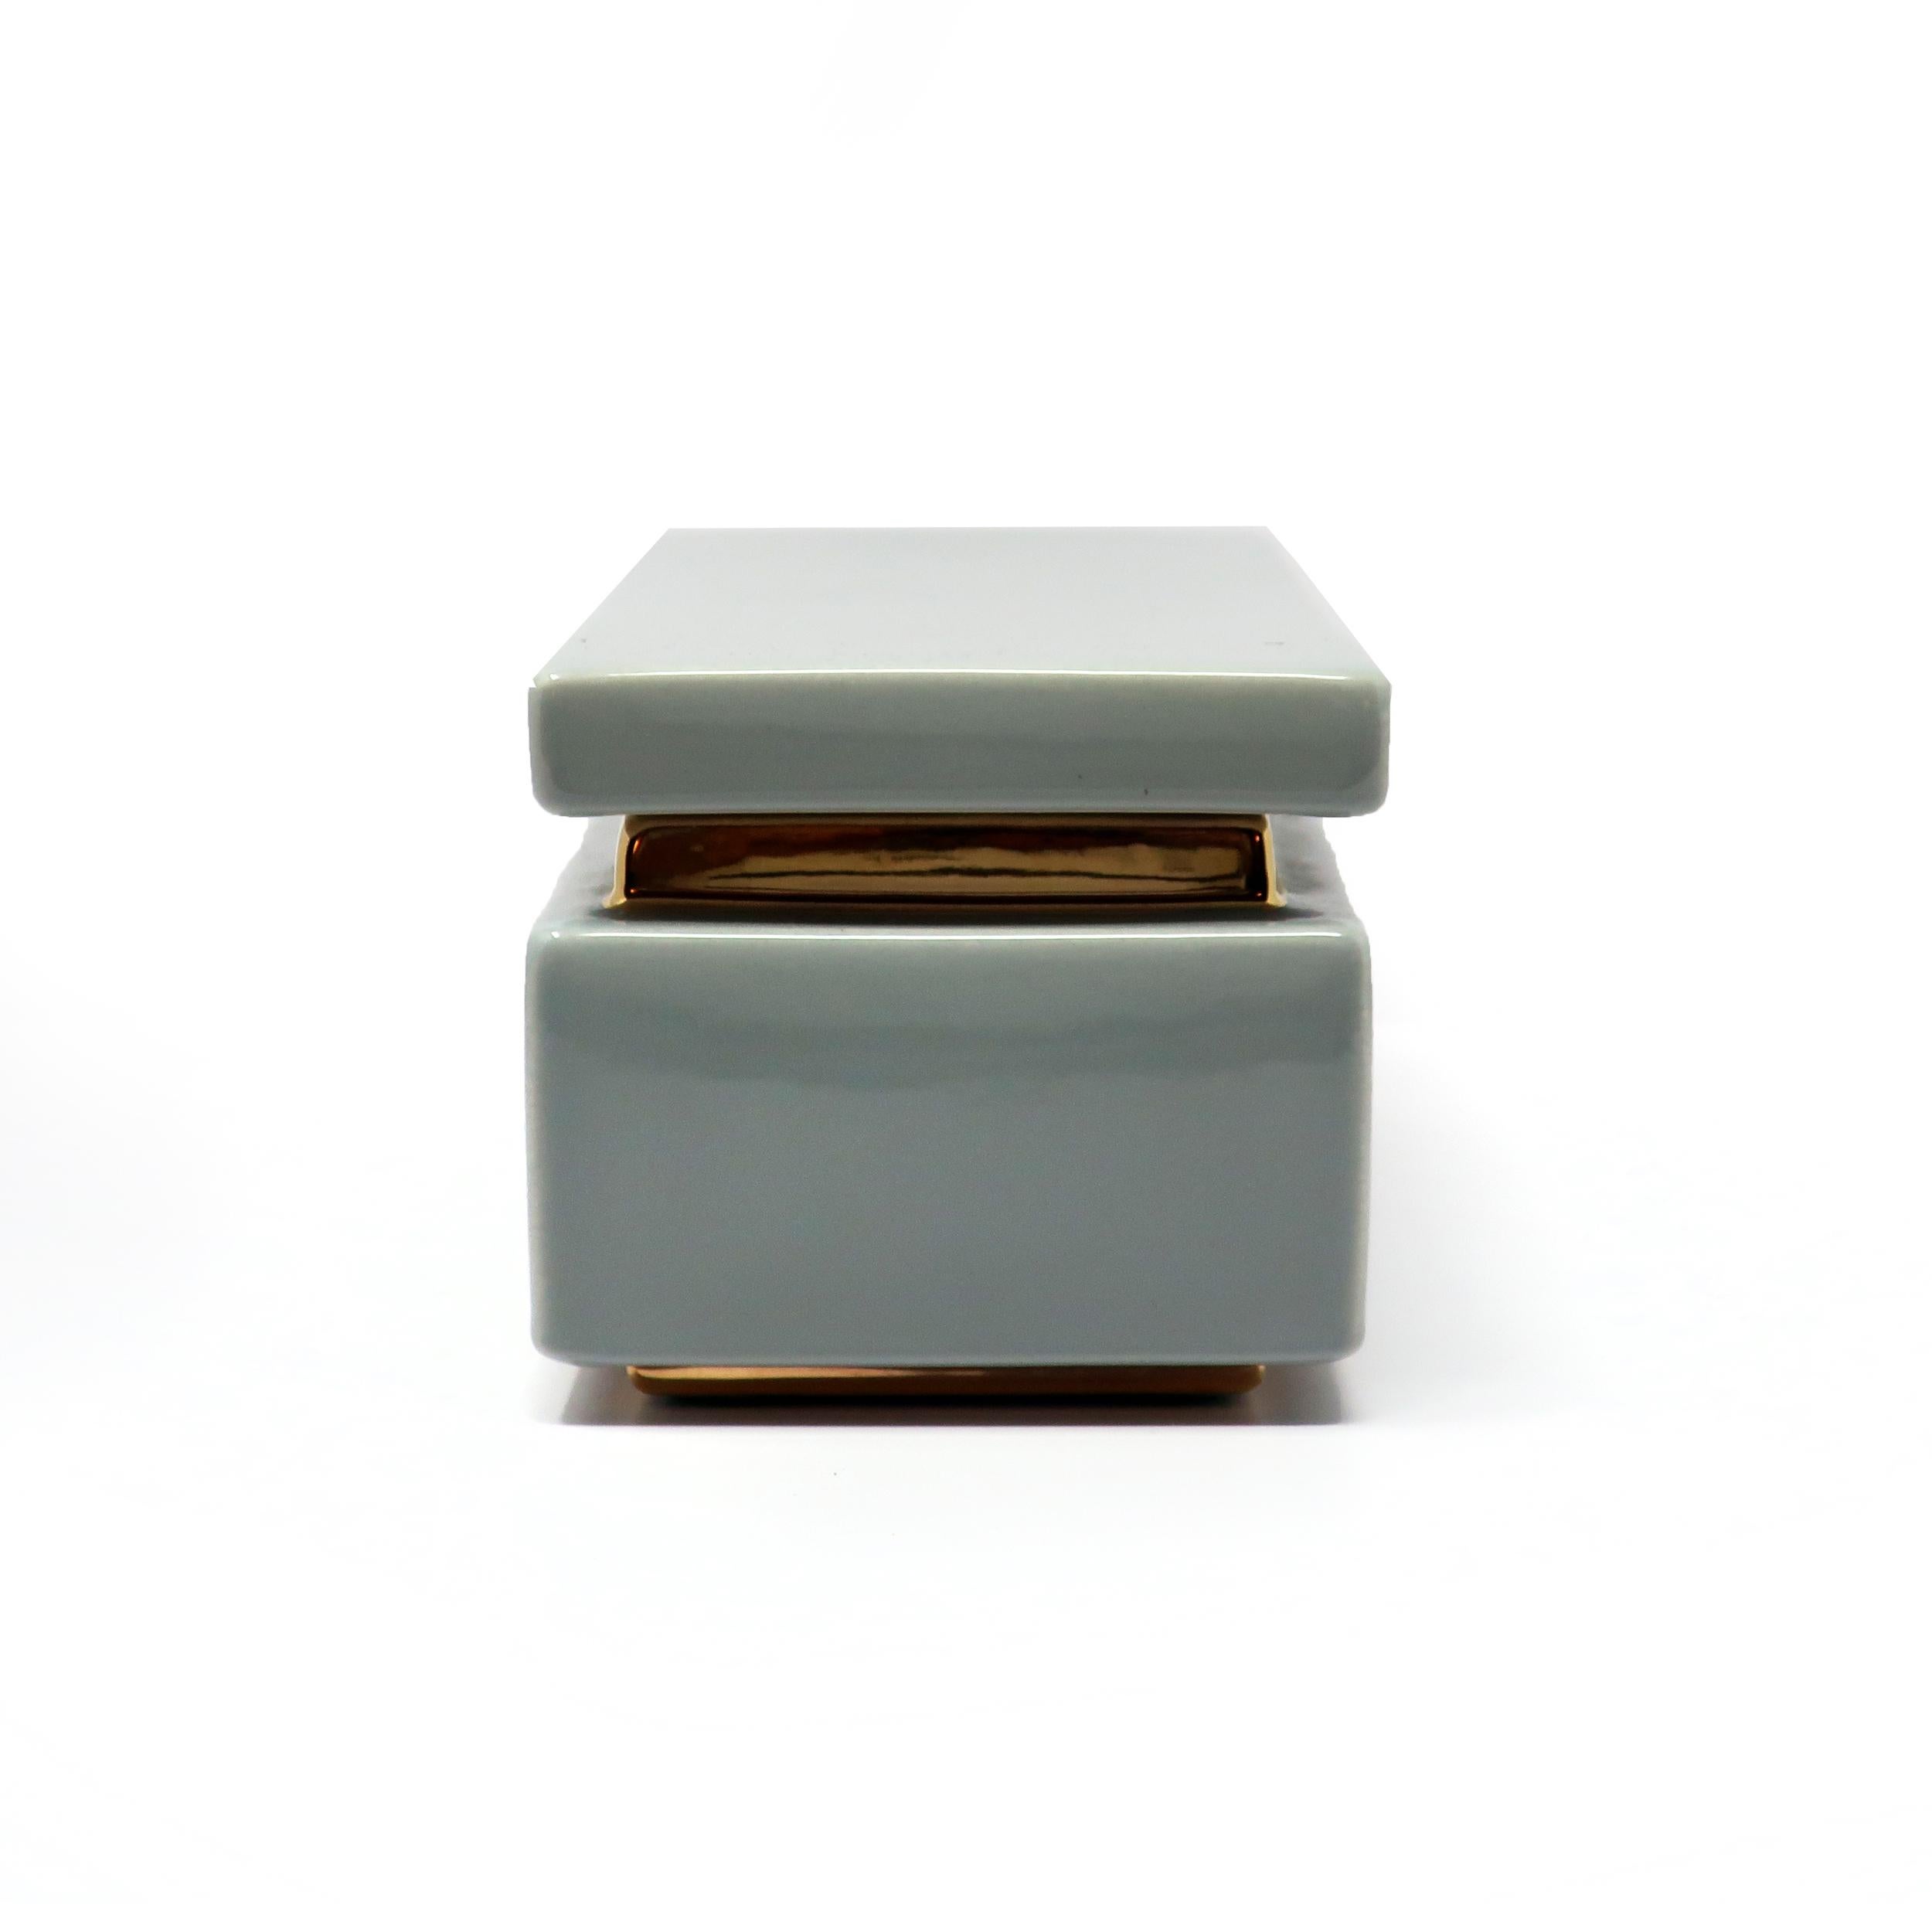 1980s Gray and Gold Decorative Ceramic Box by Jaru of California In Good Condition For Sale In Brooklyn, NY